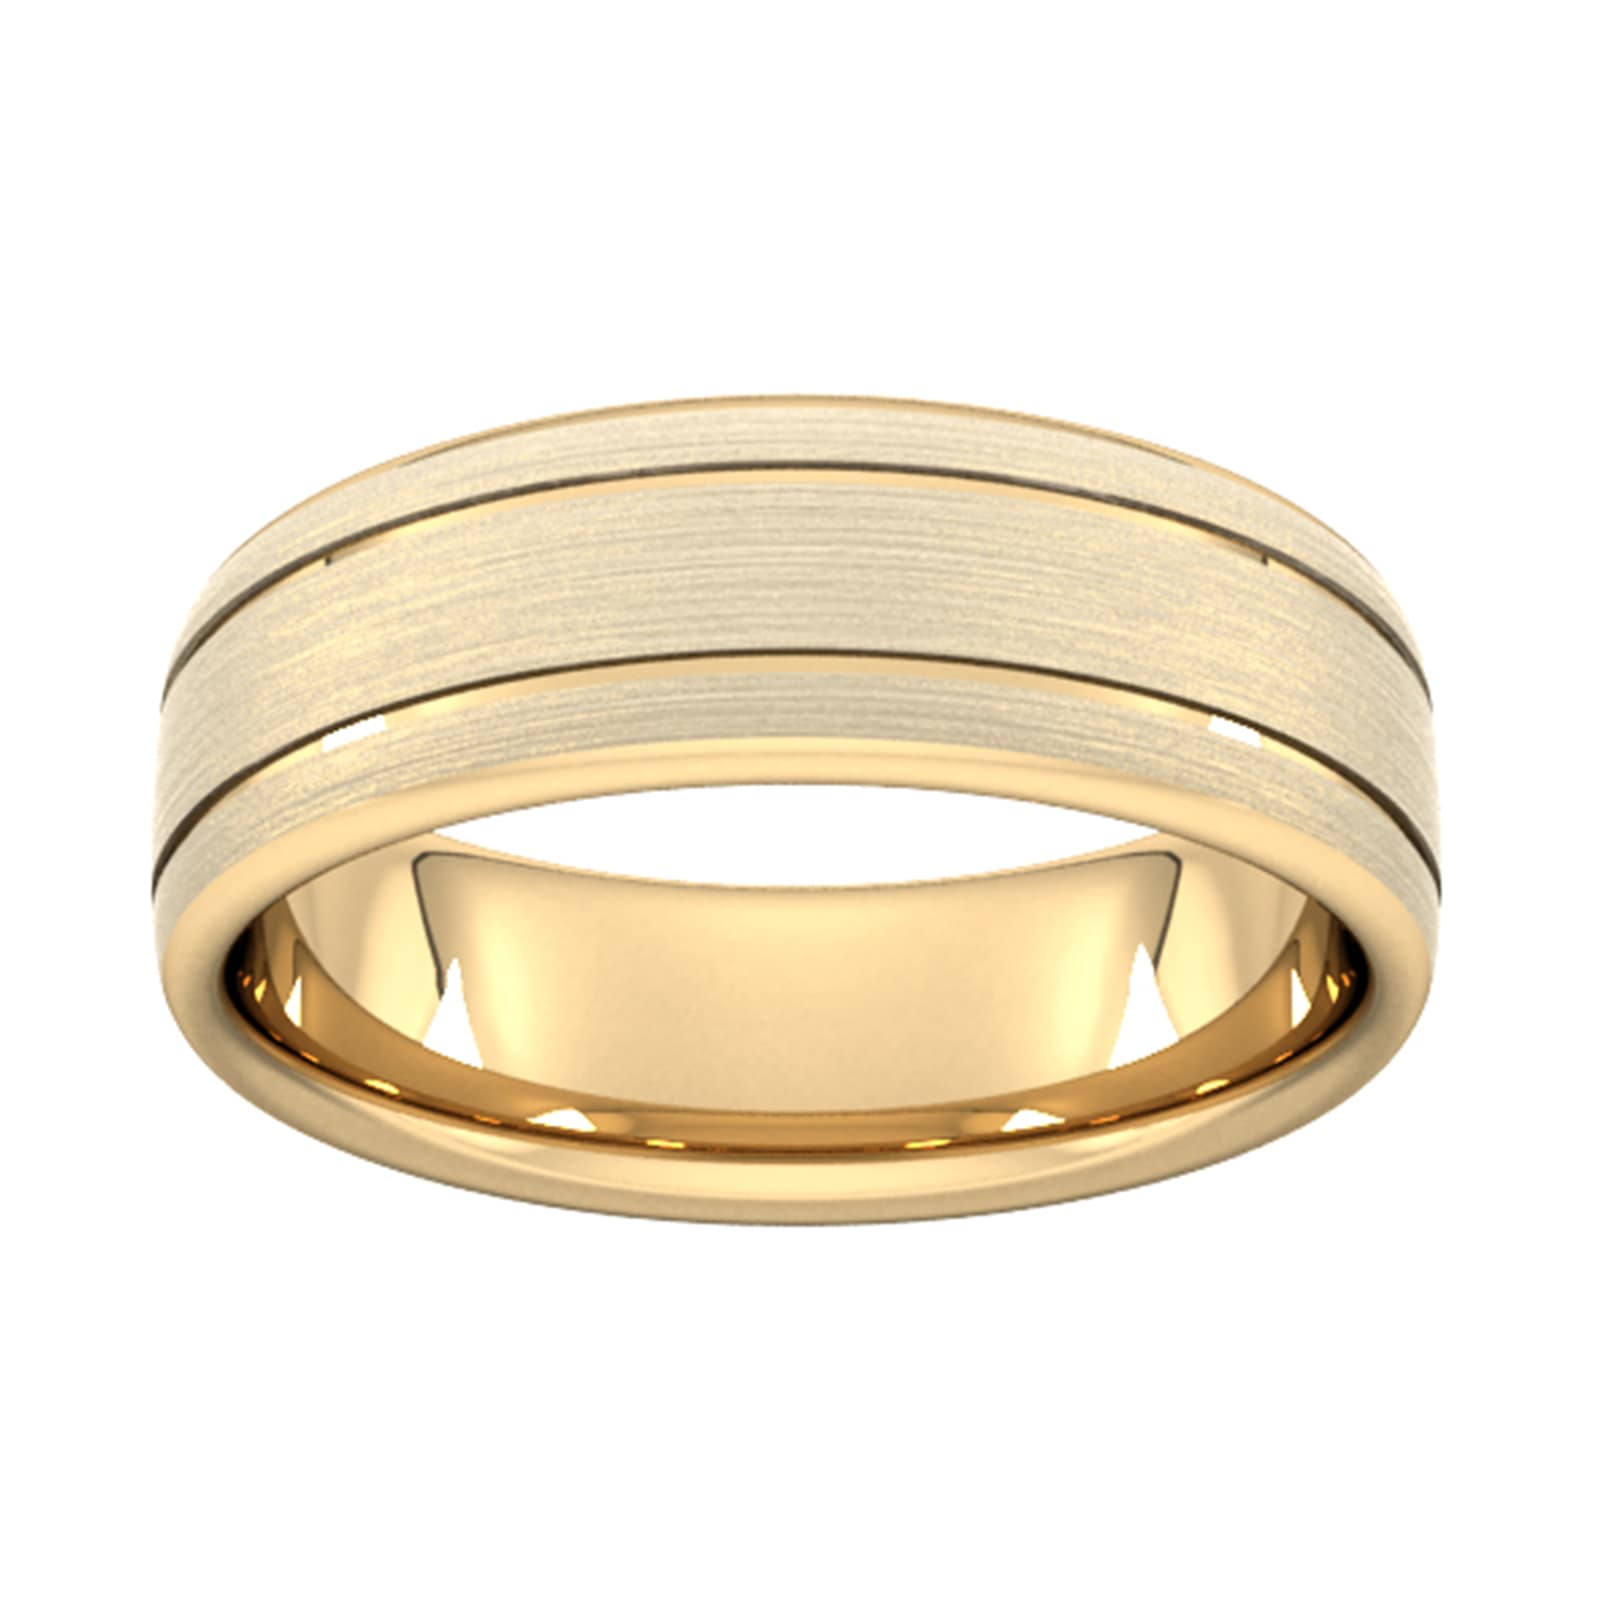 7mm Slight Court Heavy Matt Finish With Double Grooves Wedding Ring In 9 Carat Yellow Gold - Ring Size K